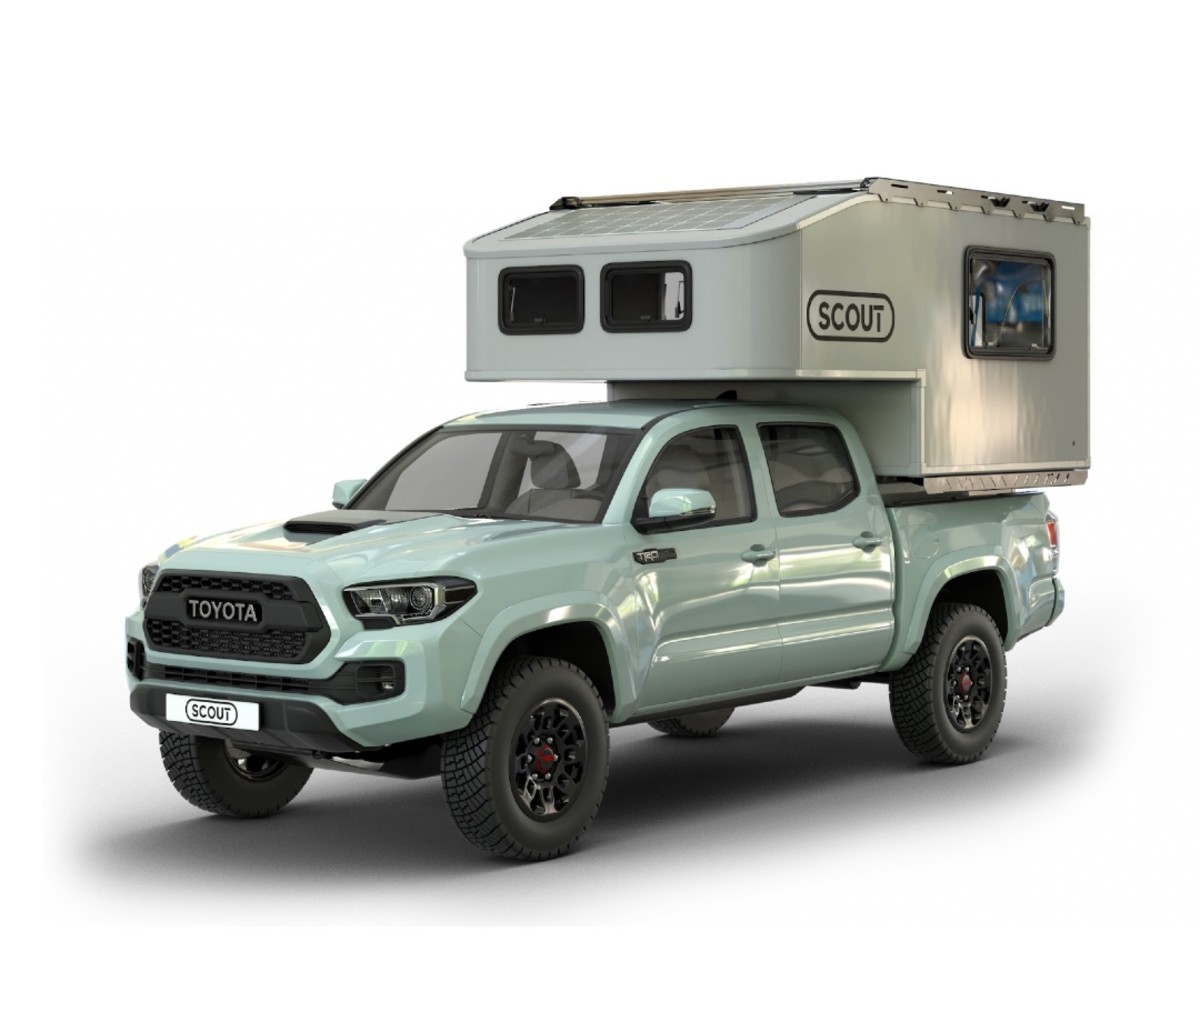 Put a Scout Truck Camper on your pickup to venture comfortably into the wild.